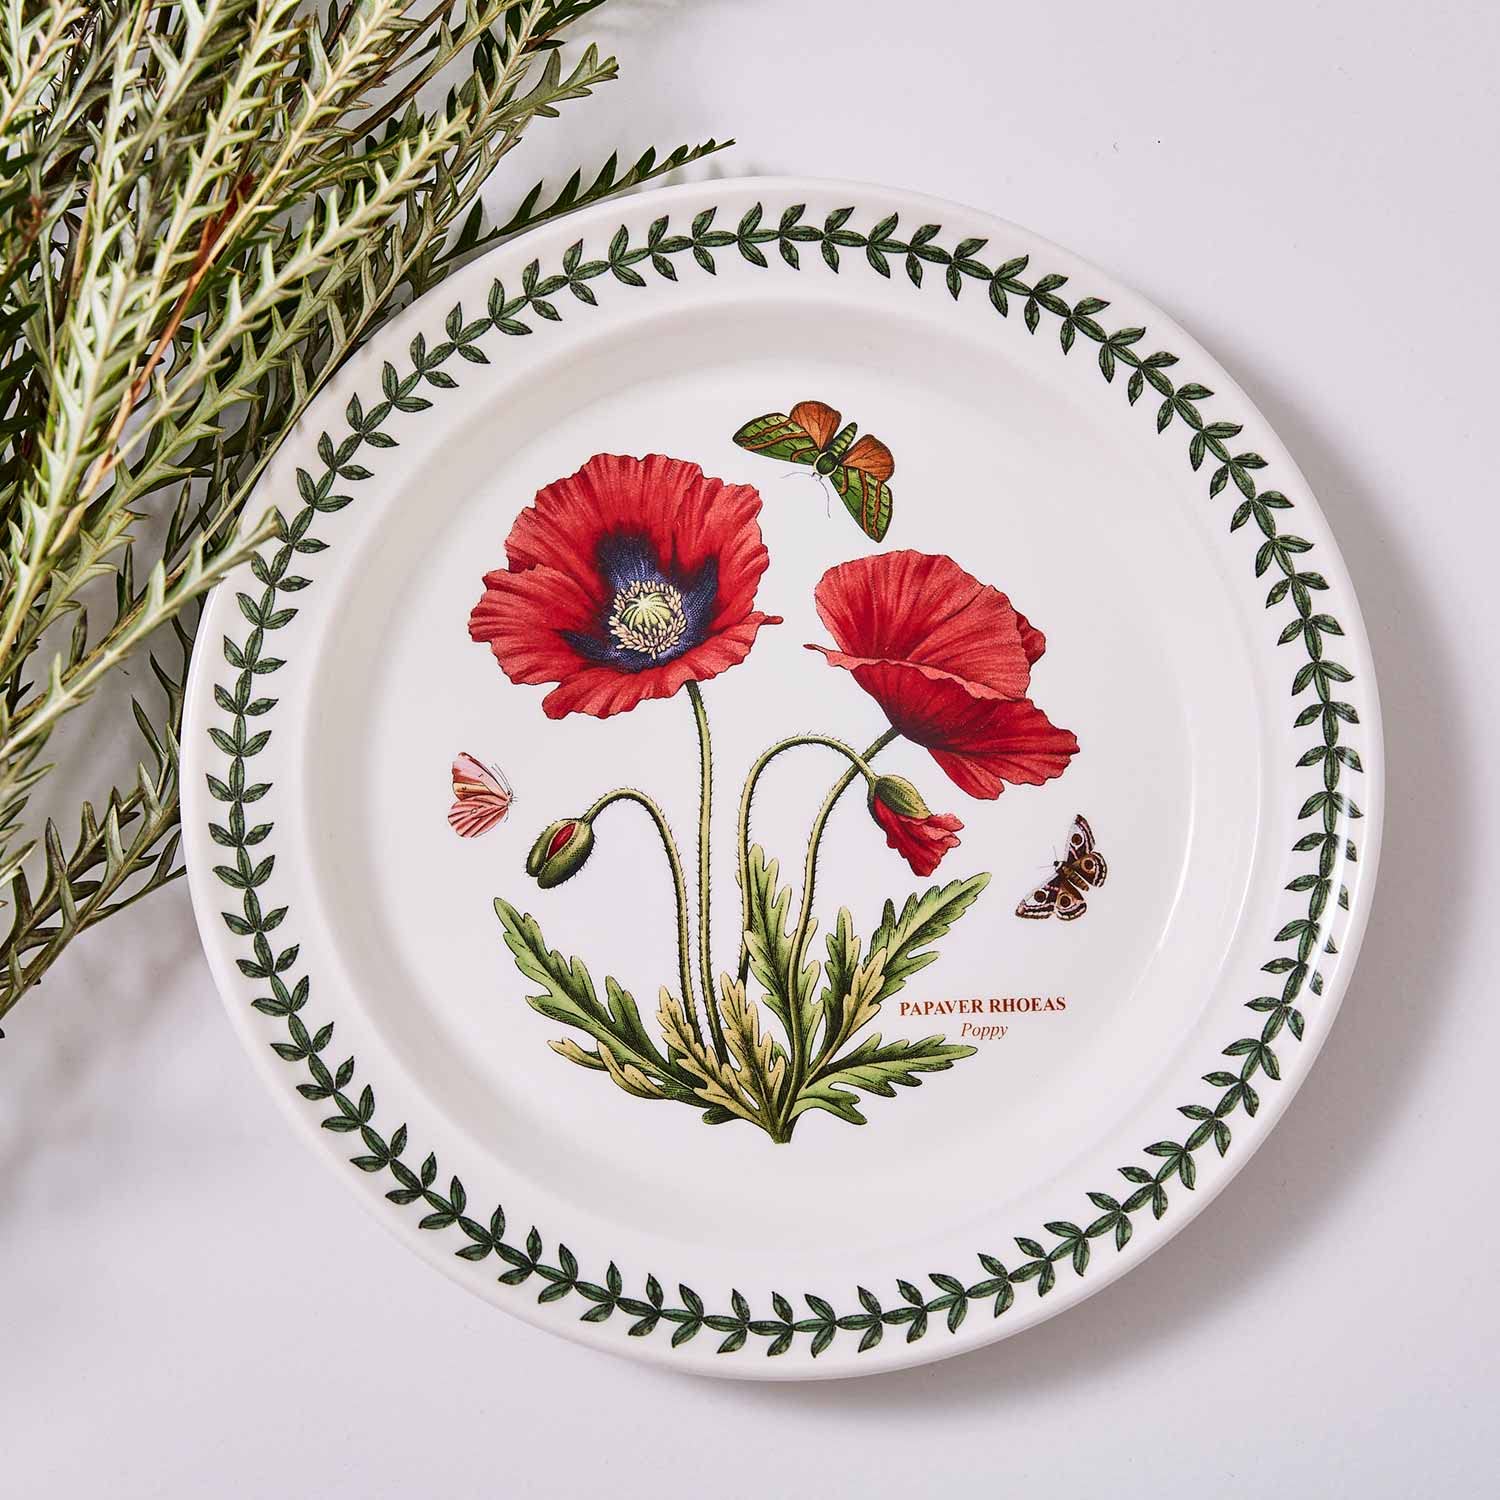 Portmeirion Botanic Garden Collection Coupe Plate | 6 Inch Round Plate with Poppy Motif | Made from Porcelain | Dishwasher, Freezer, and Microwave Safe